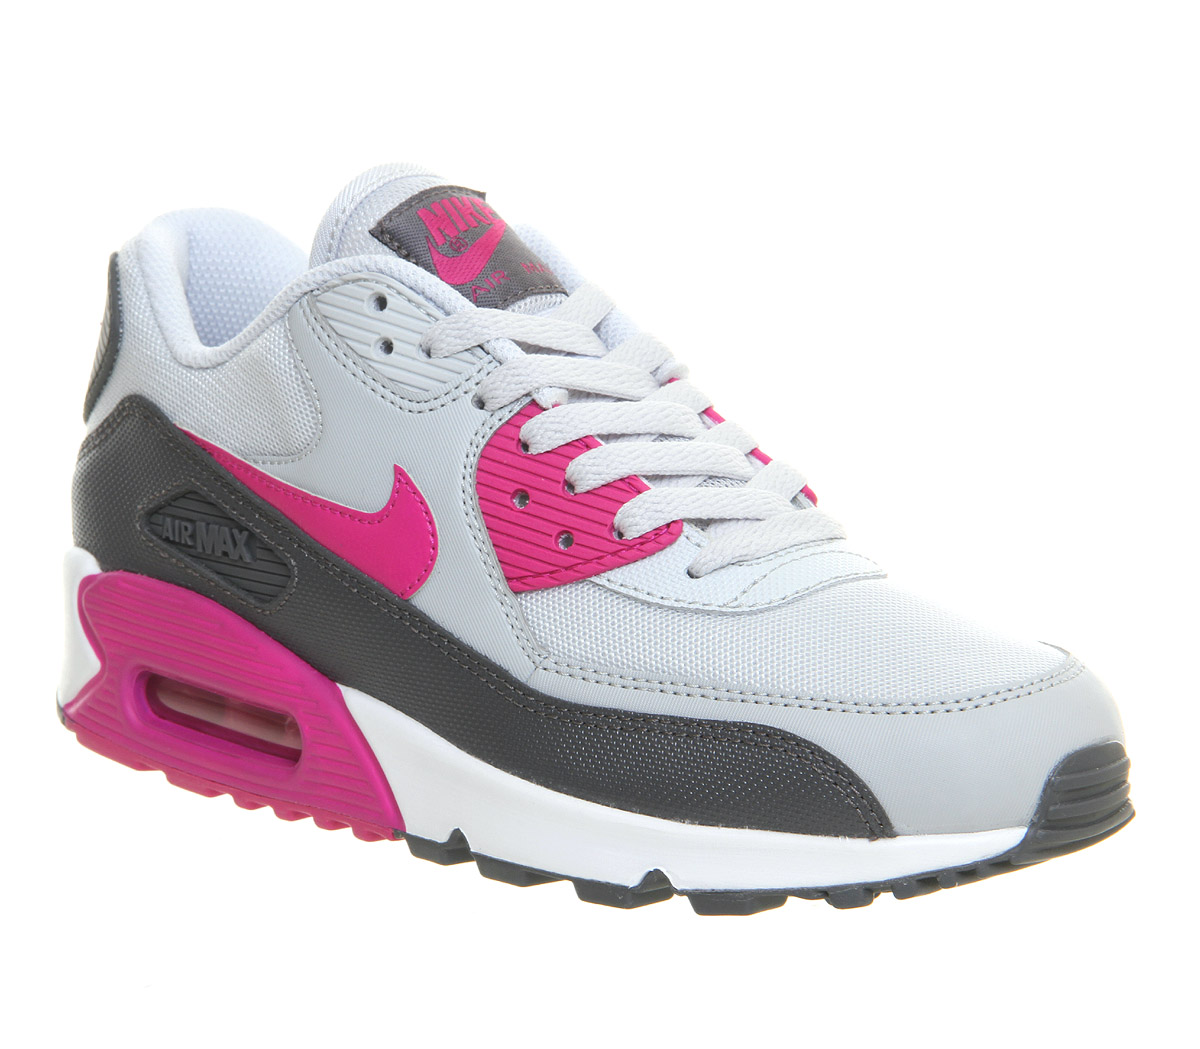 Nike Air Max 90 Pink Grey White - Hers trainers